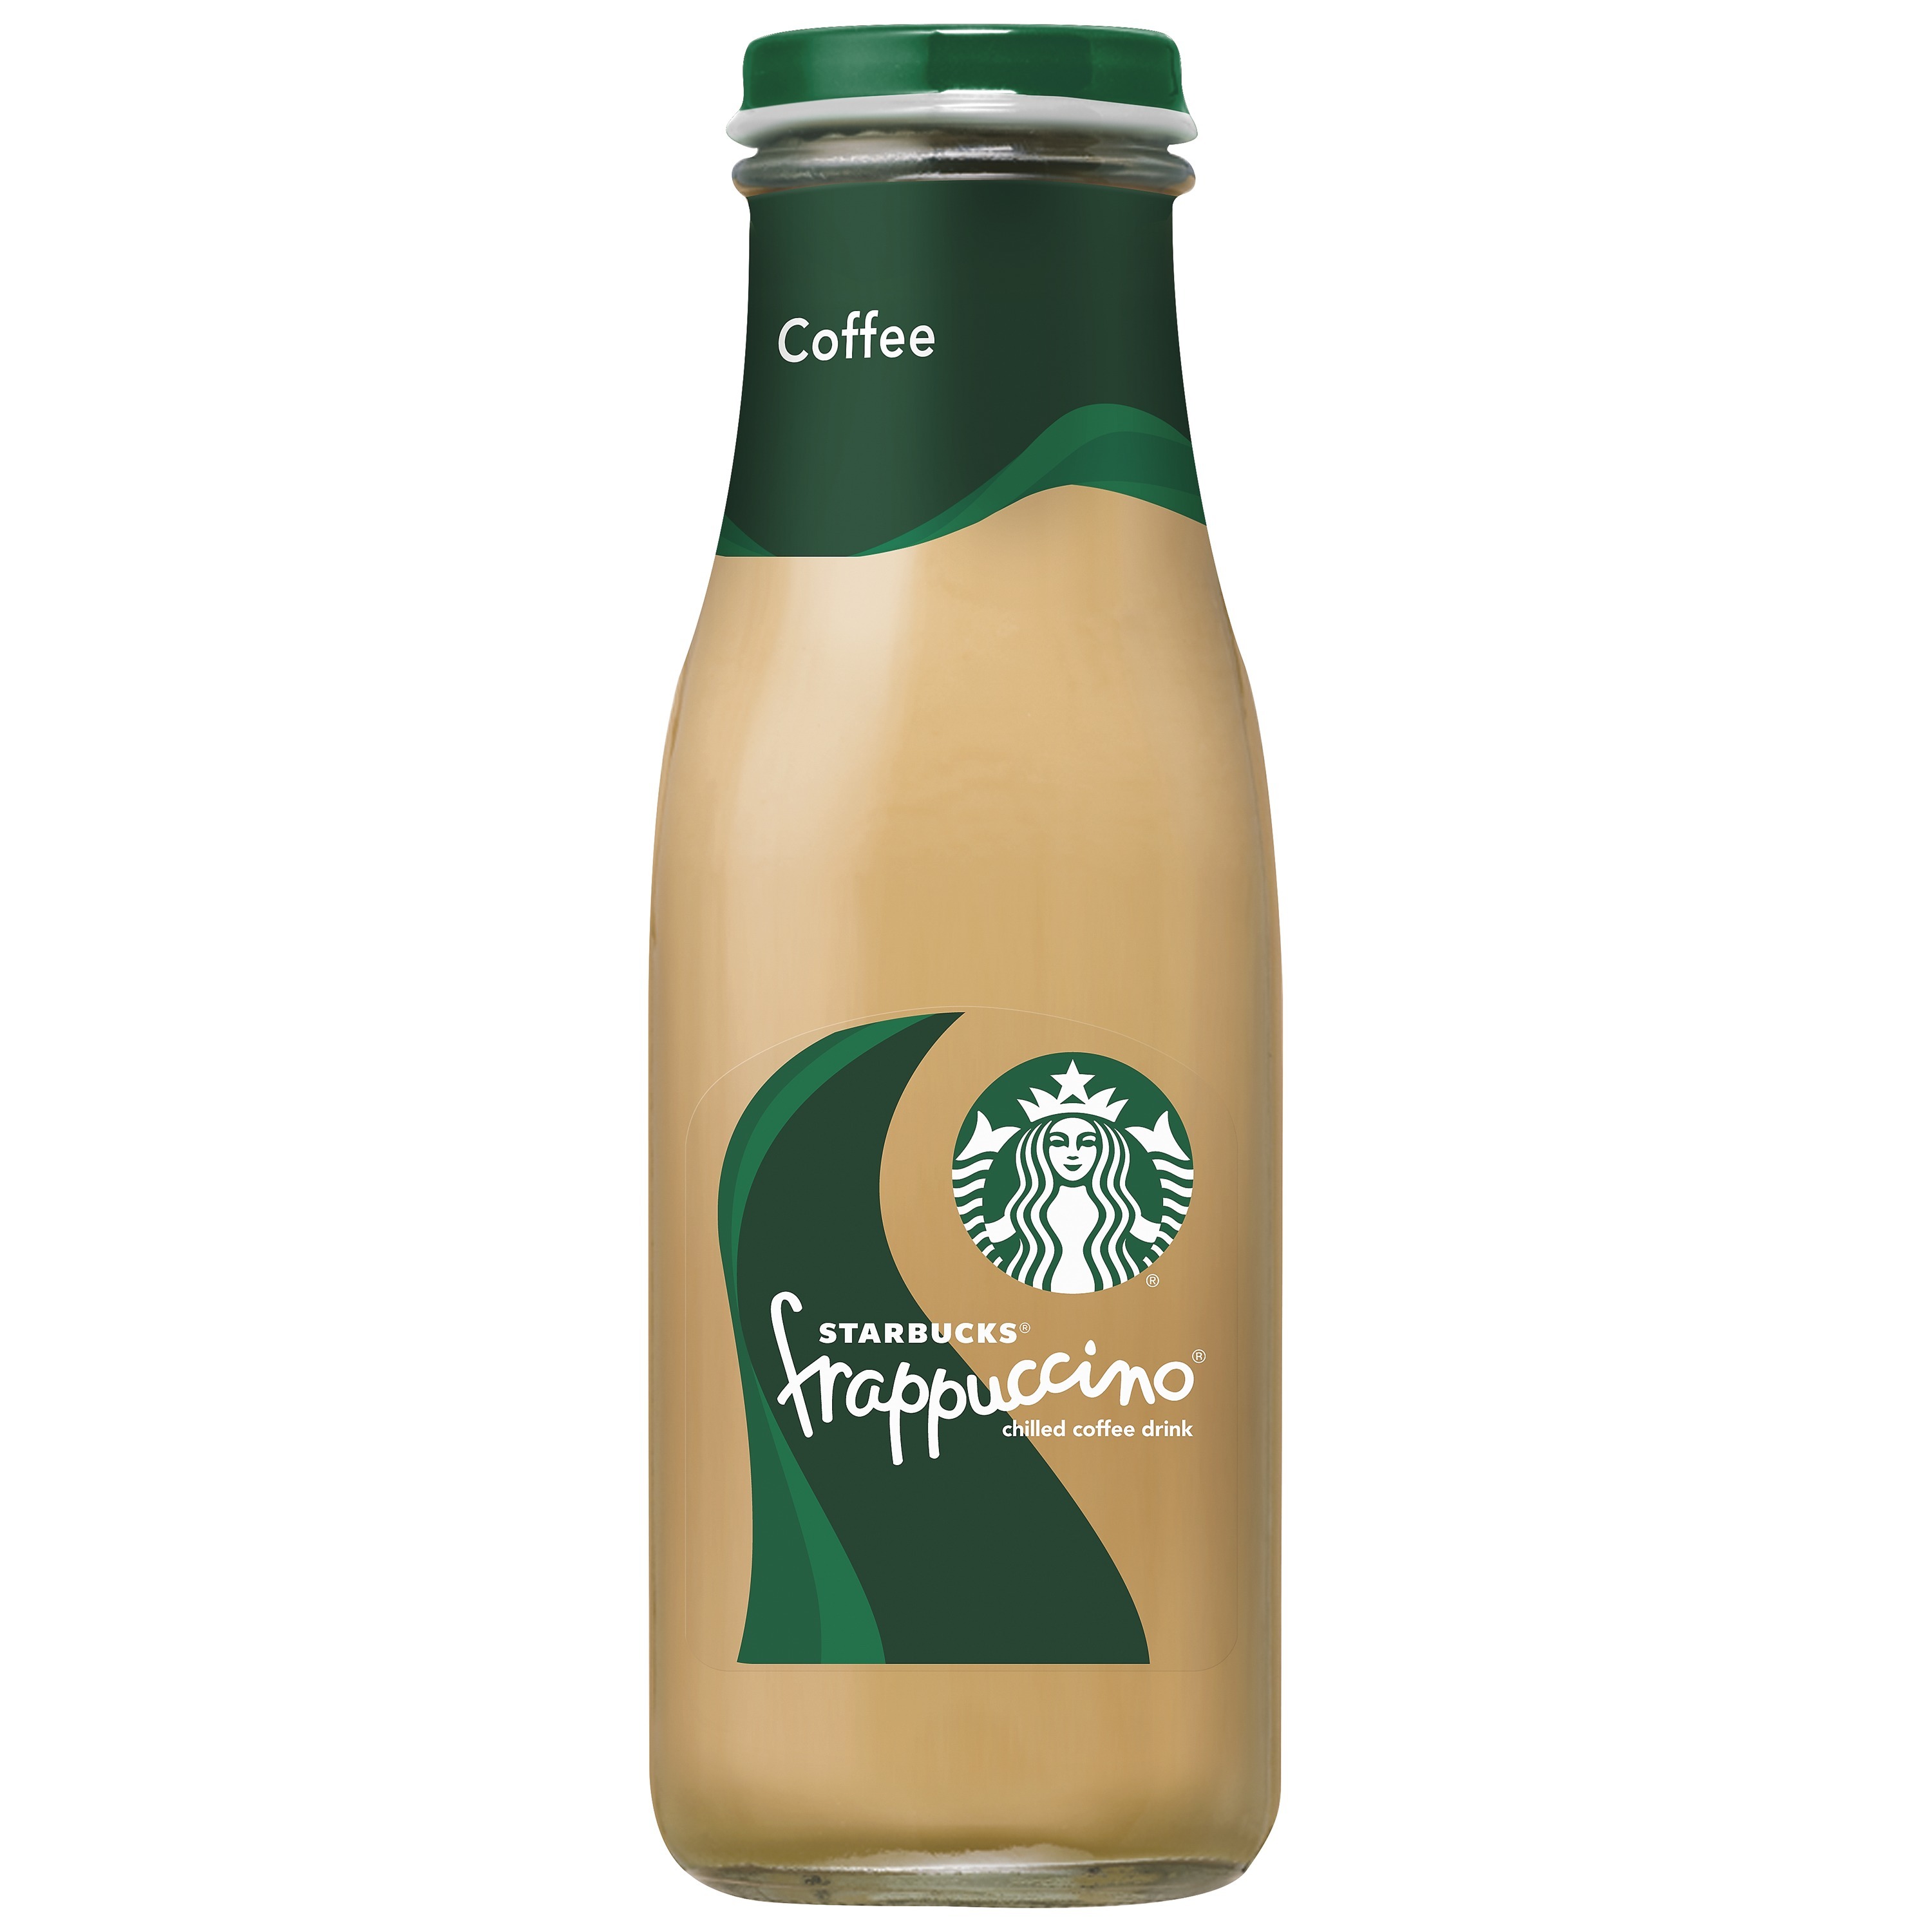 Starbucks Frappuccino Iced Coffee 13.7 oz Bottle - image 1 of 2